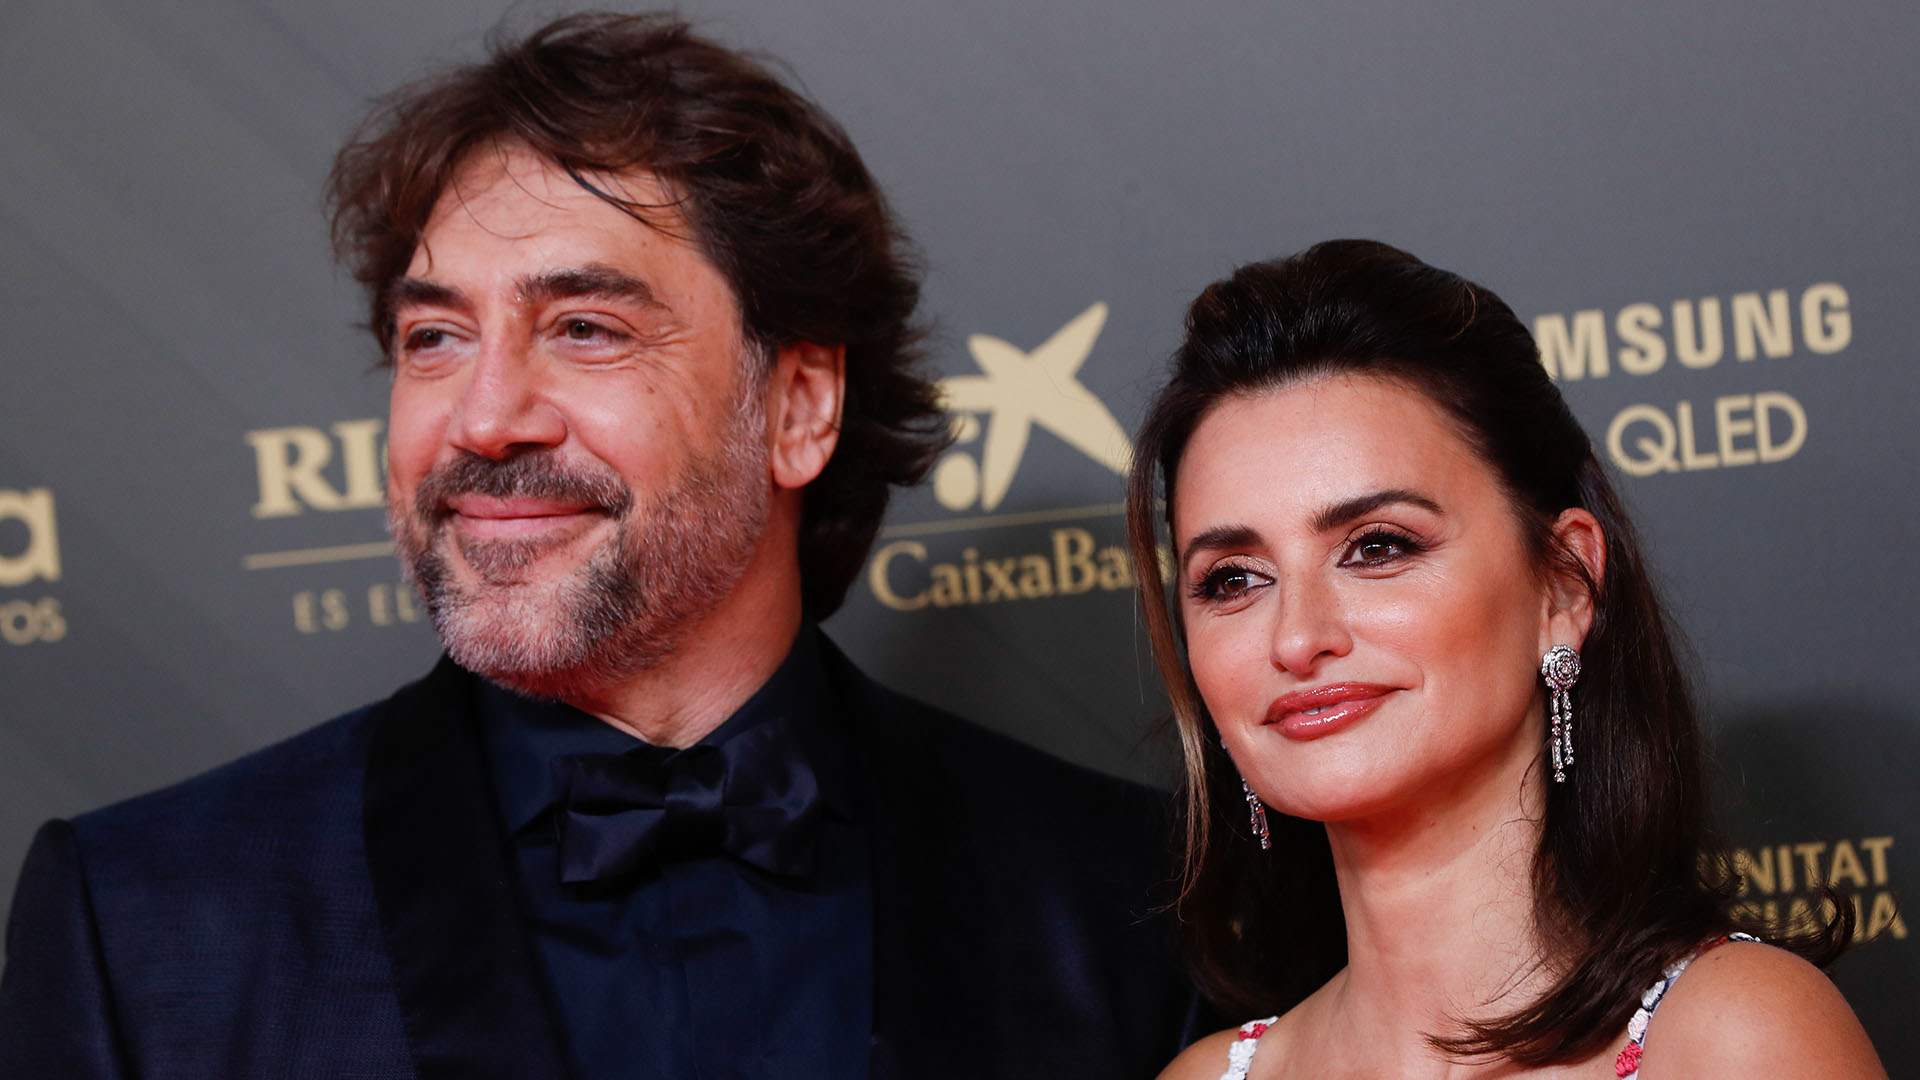 Actors Penelope Cruz and Javier Bardem at photocall for the 36th annual Goya Film Awards in Valencia on Saturday 12 February, 2022.